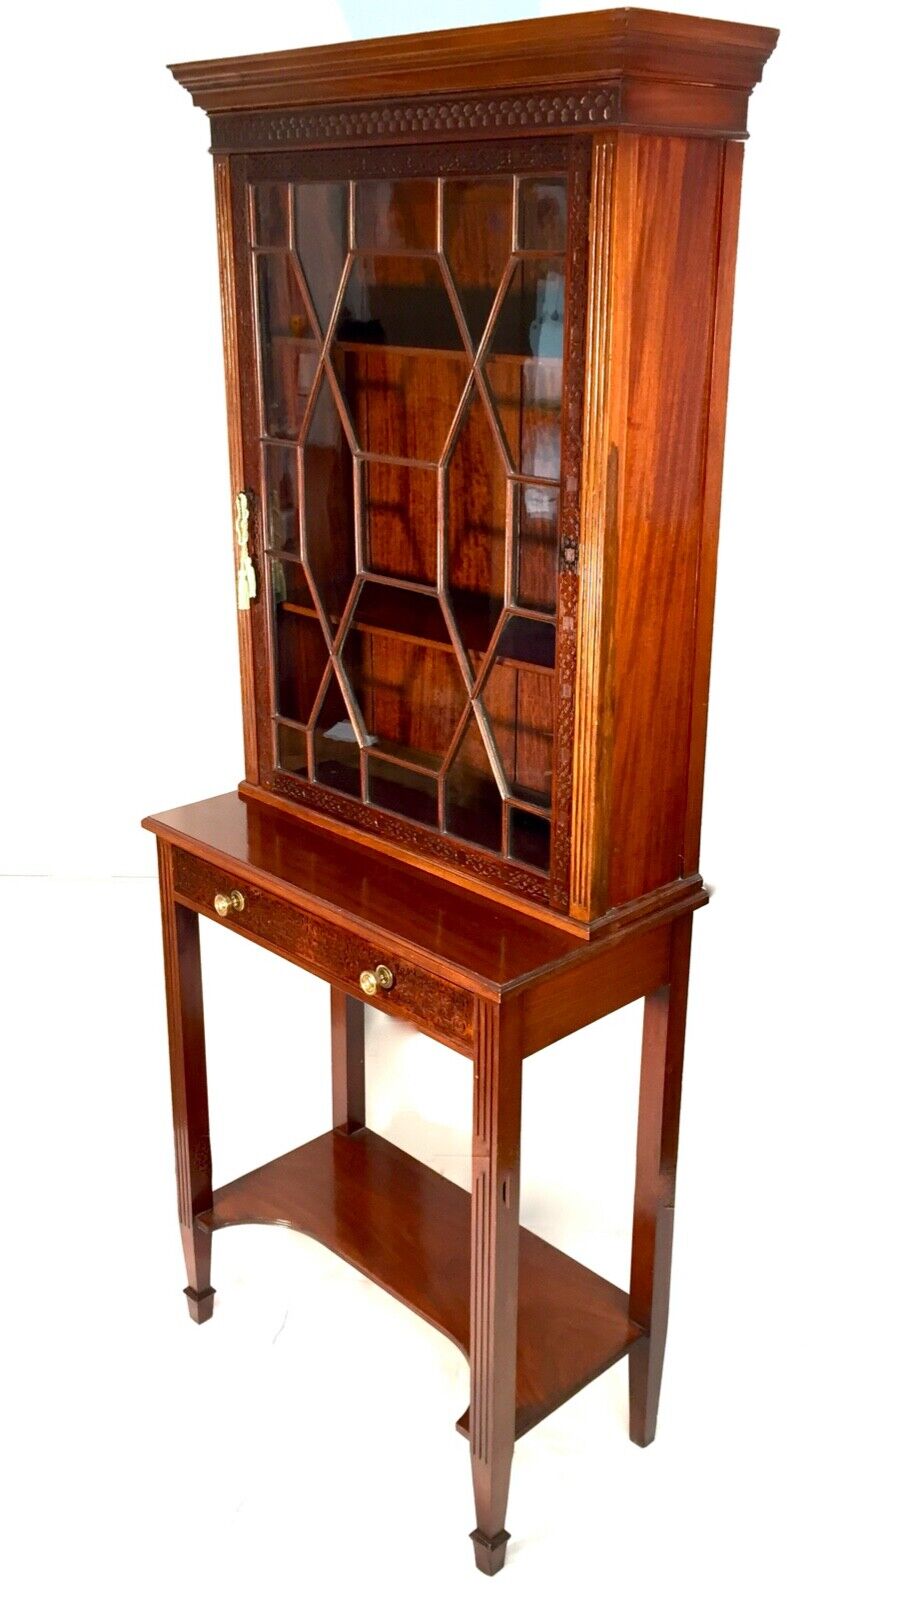 Antique Large Mahogany Chippendale Style Bookcase Display Cabinet / Cupboard